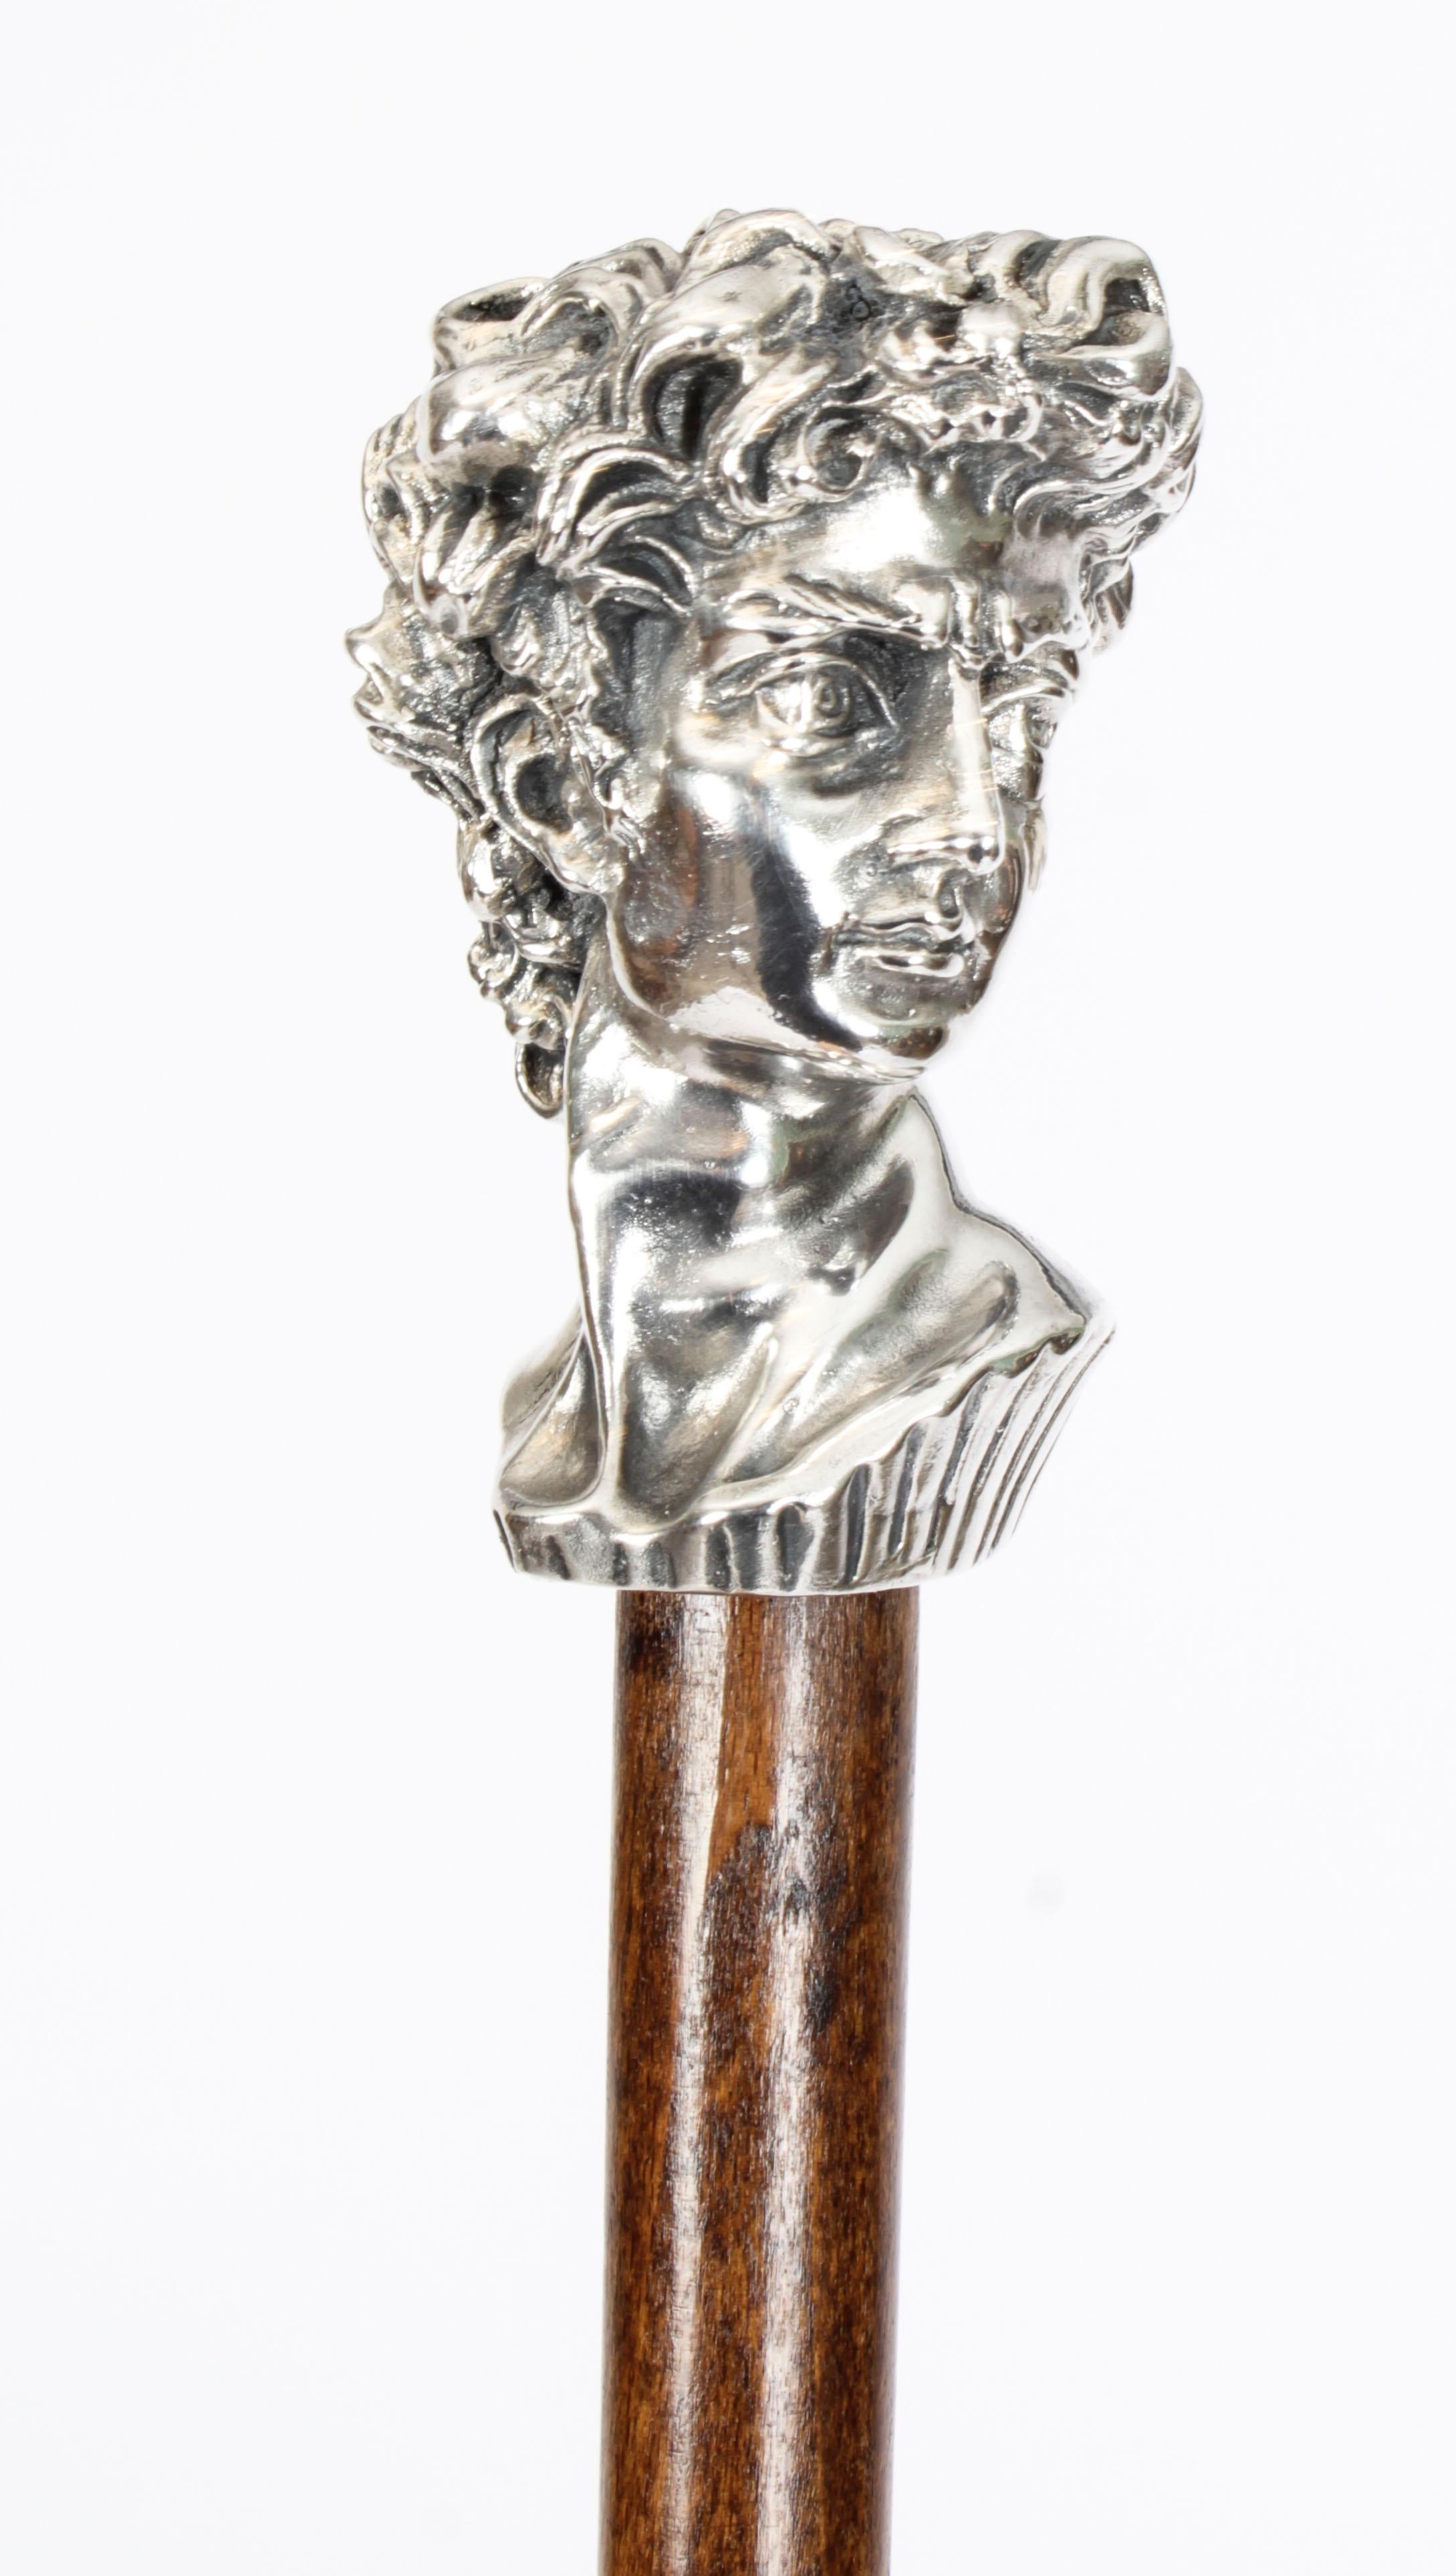 This is a beautiful antique Italian gentleman's cast 800 silver walking stick, Circa 1880 in date
 
This striking cane features an ornate cast silver mounted figure head pommel realistically modelled depicting a Romansque head, could be David, on